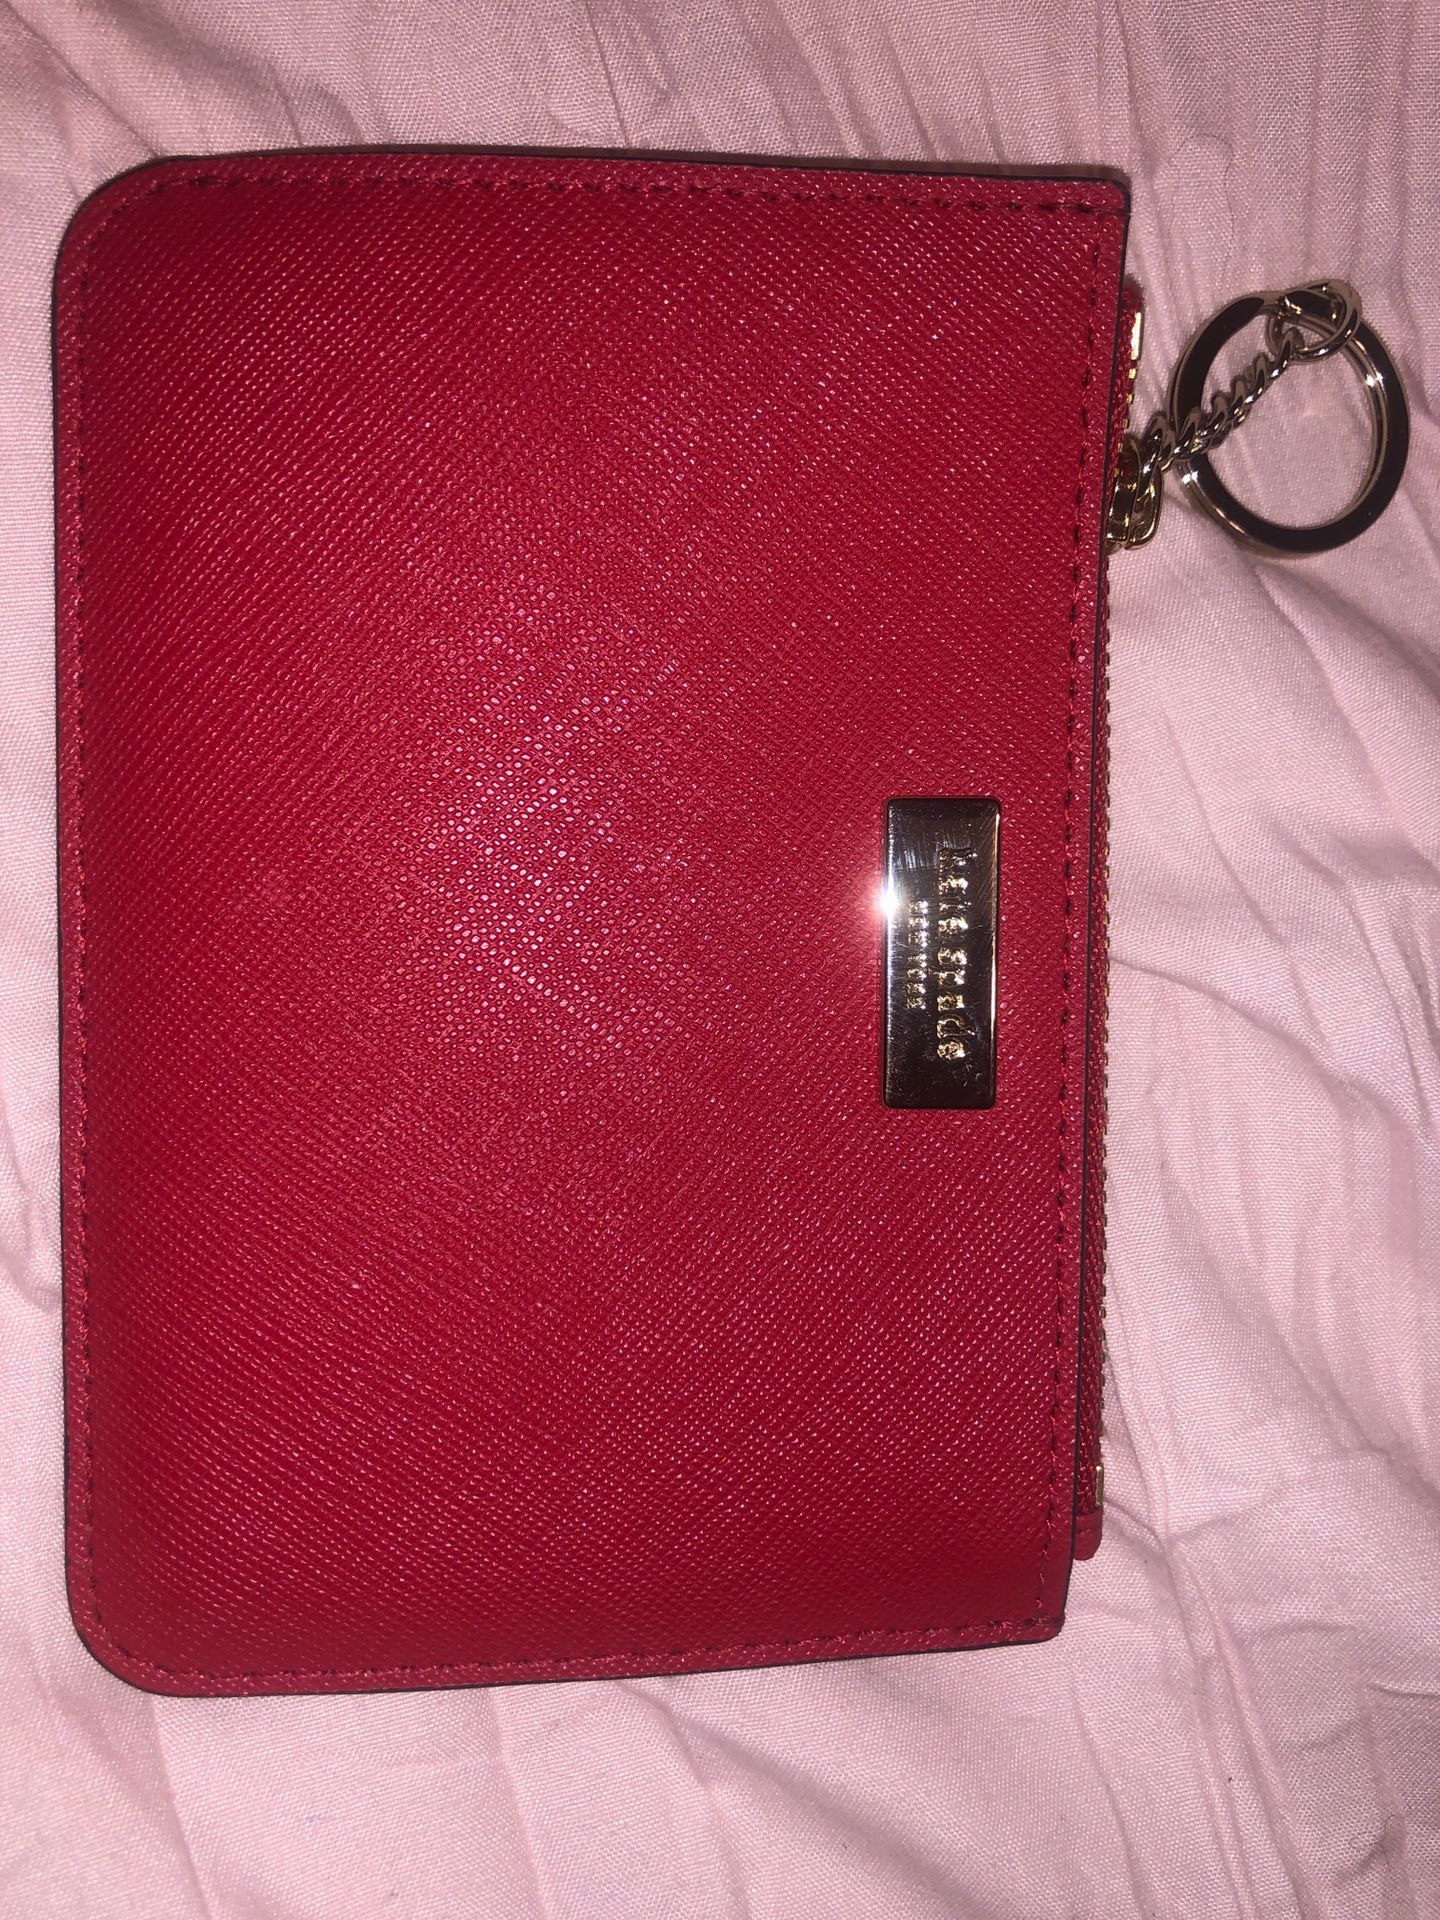 Like New Authentic Kate Spade Wallet